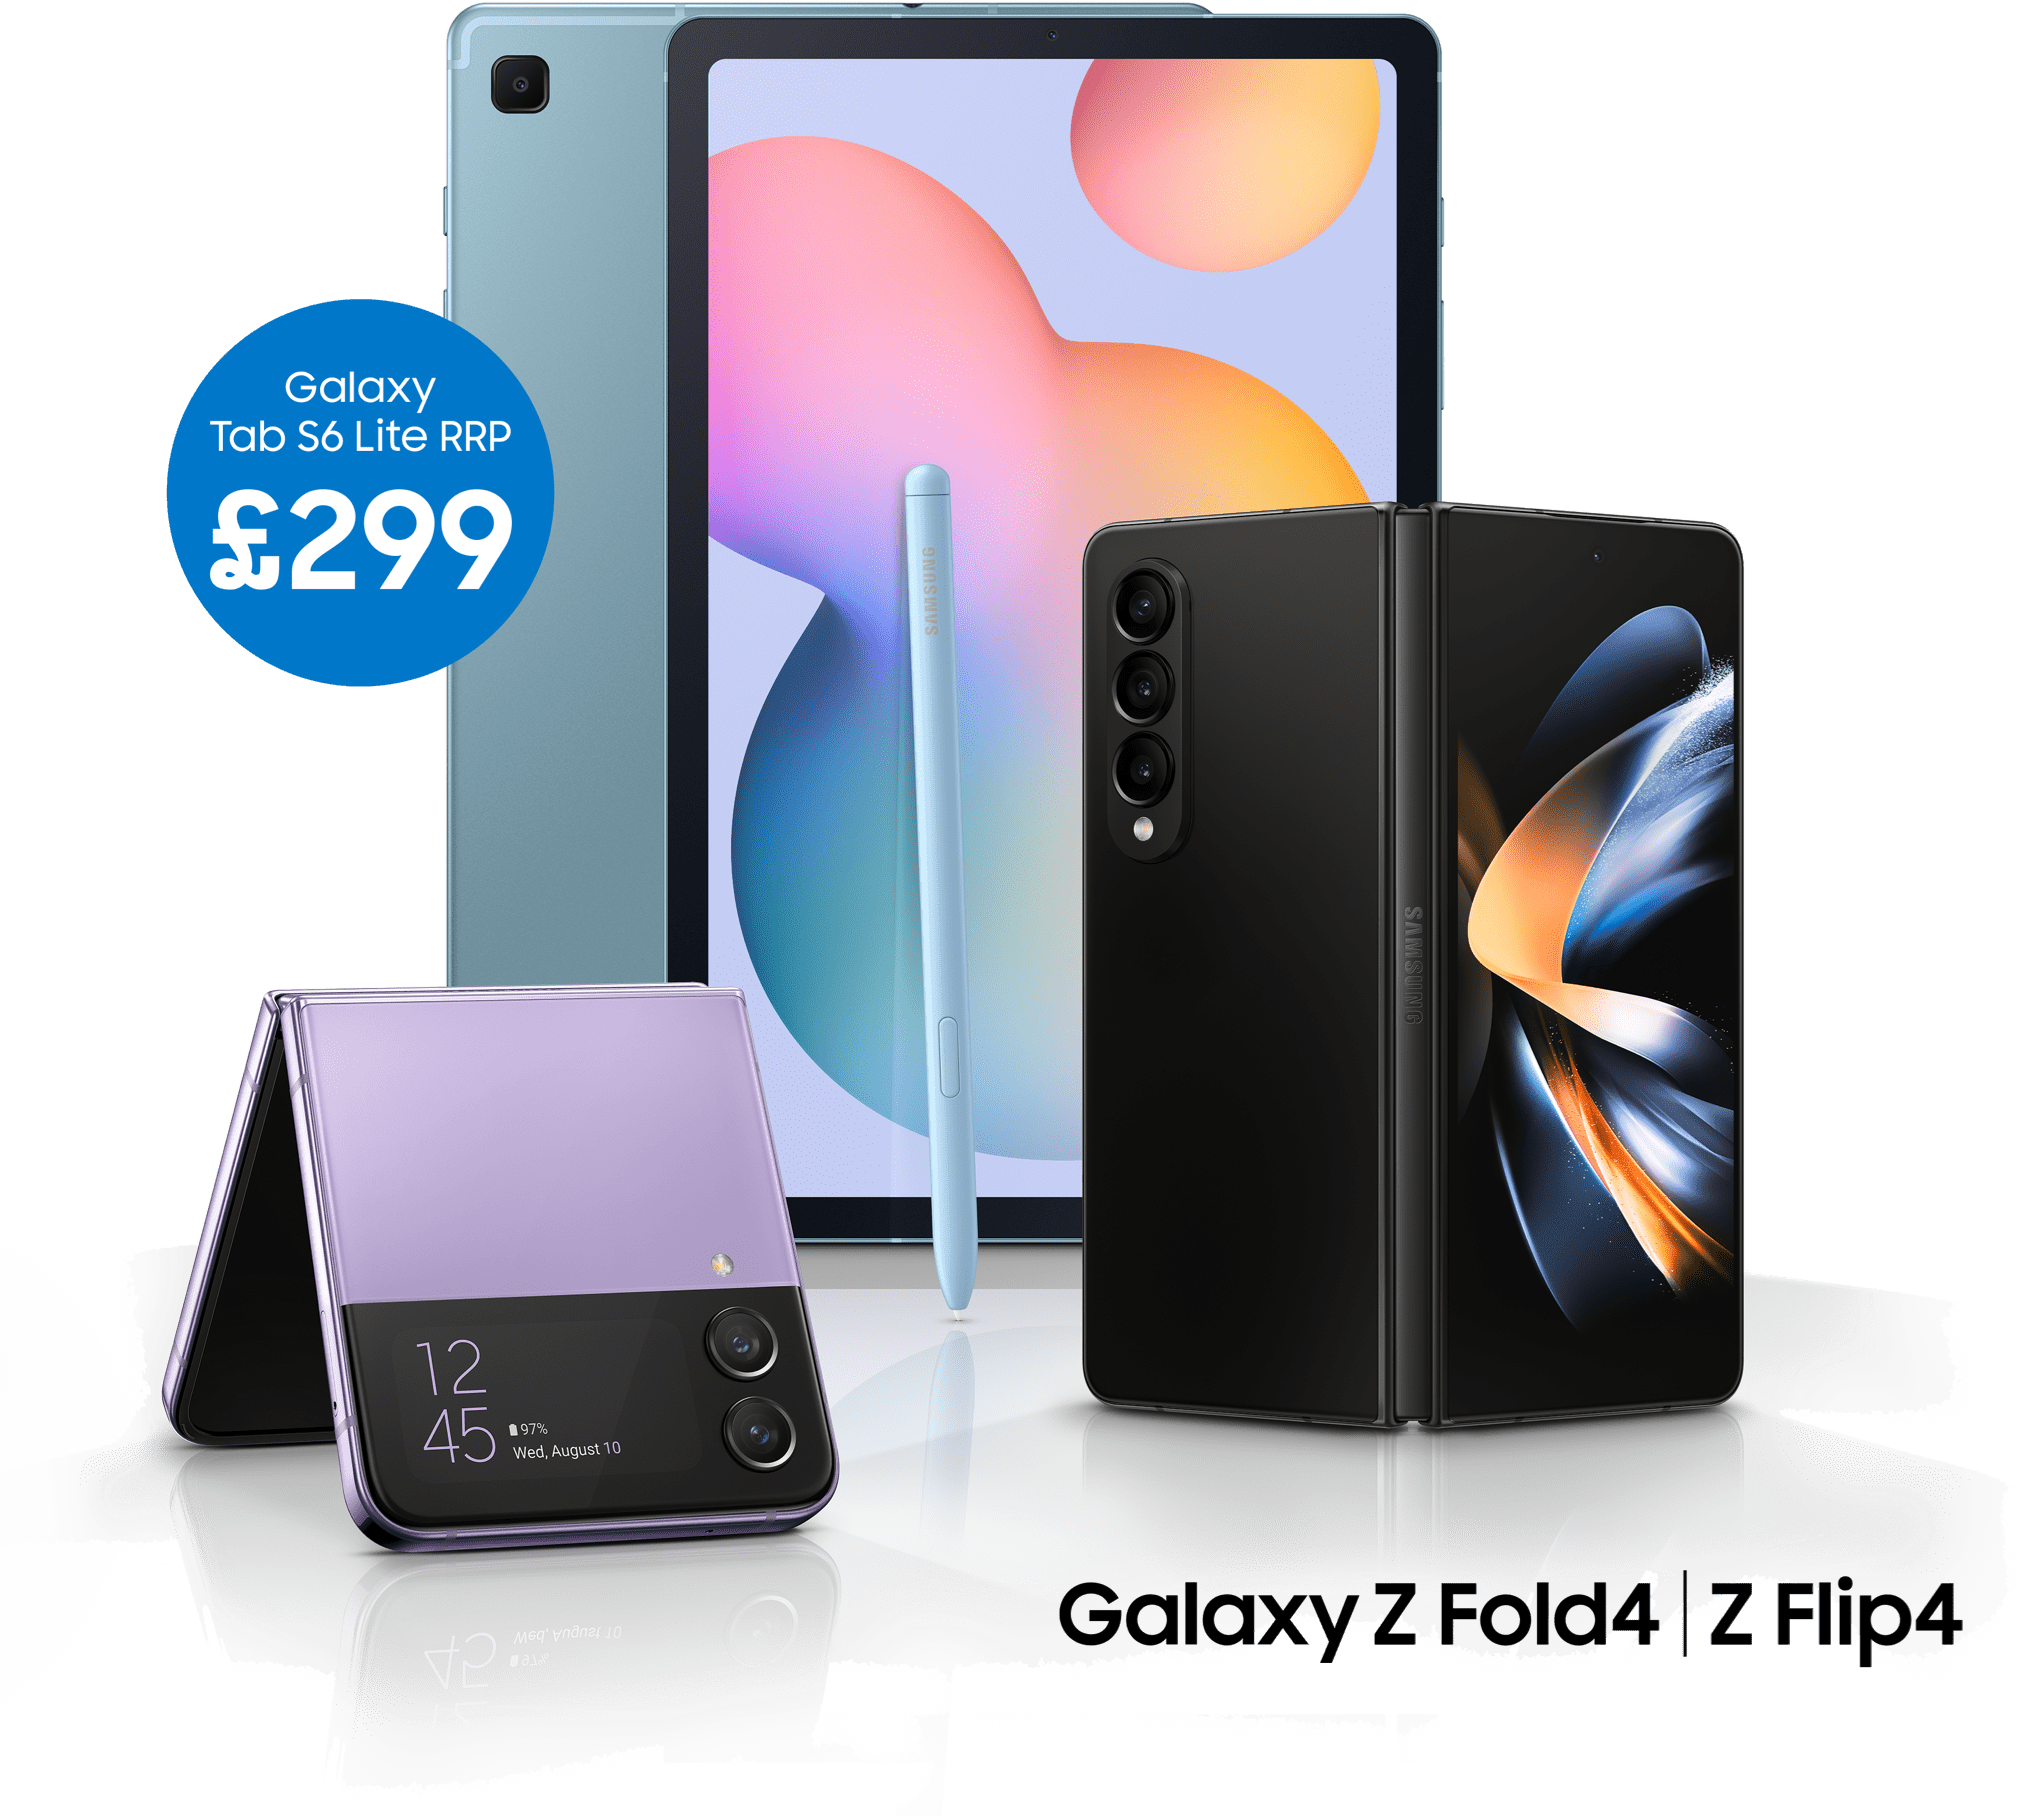 Samsung Z Flip4 and Z Fold4 deals with free Galaxy Tab S6 Lite tablet